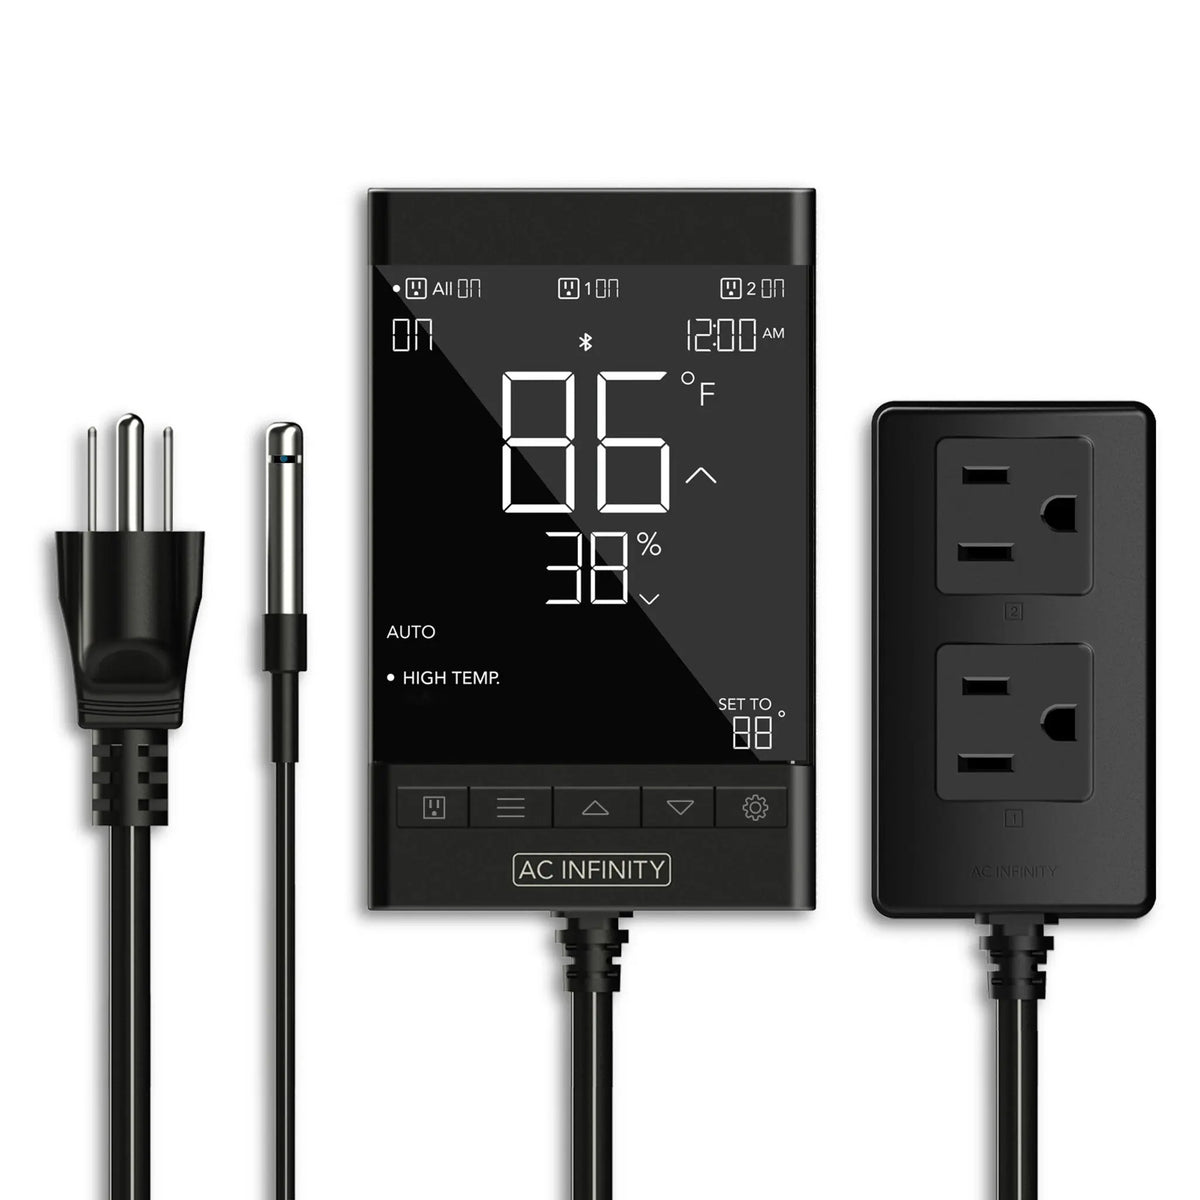 AC Infinity CONTROLLER 79 Temperature and Humidity 2 Device Controller